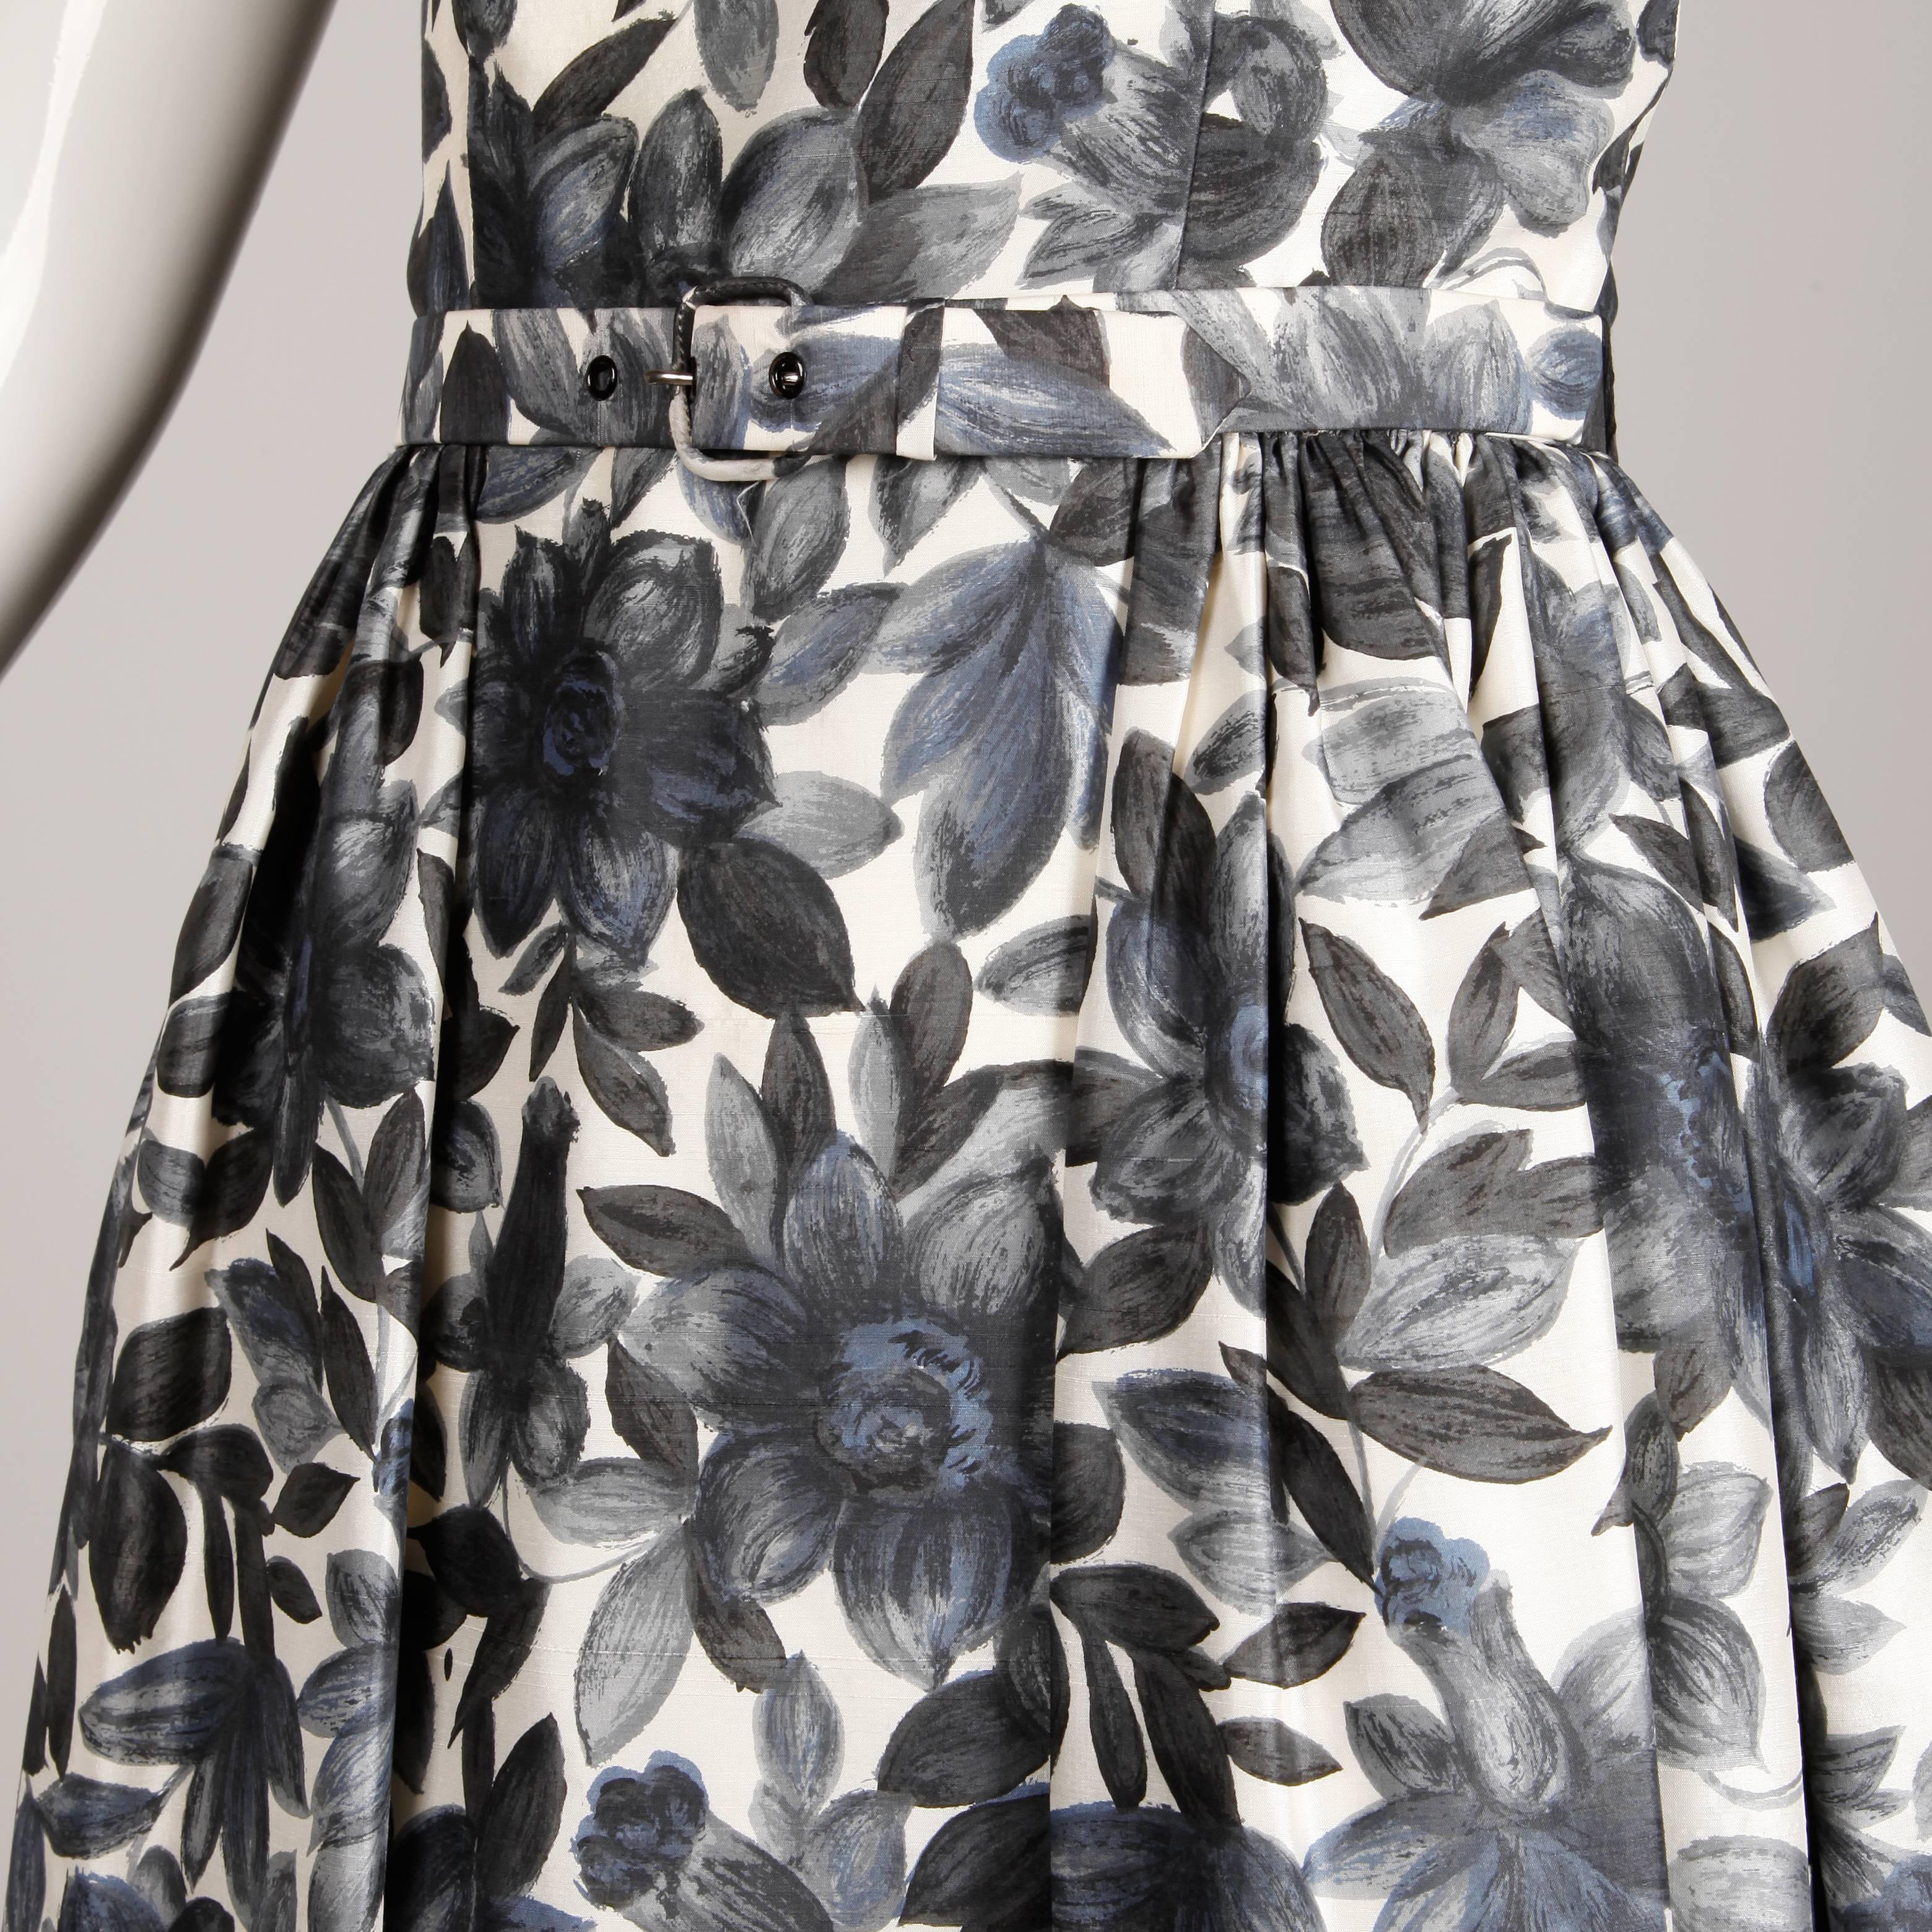 Beautiful vintage 1950s silk dress in a gray and blue watercolor floral print with matching belt. Fully lined with rear metal zip and hook closure. Fits like a modern size small. The bust measures 38